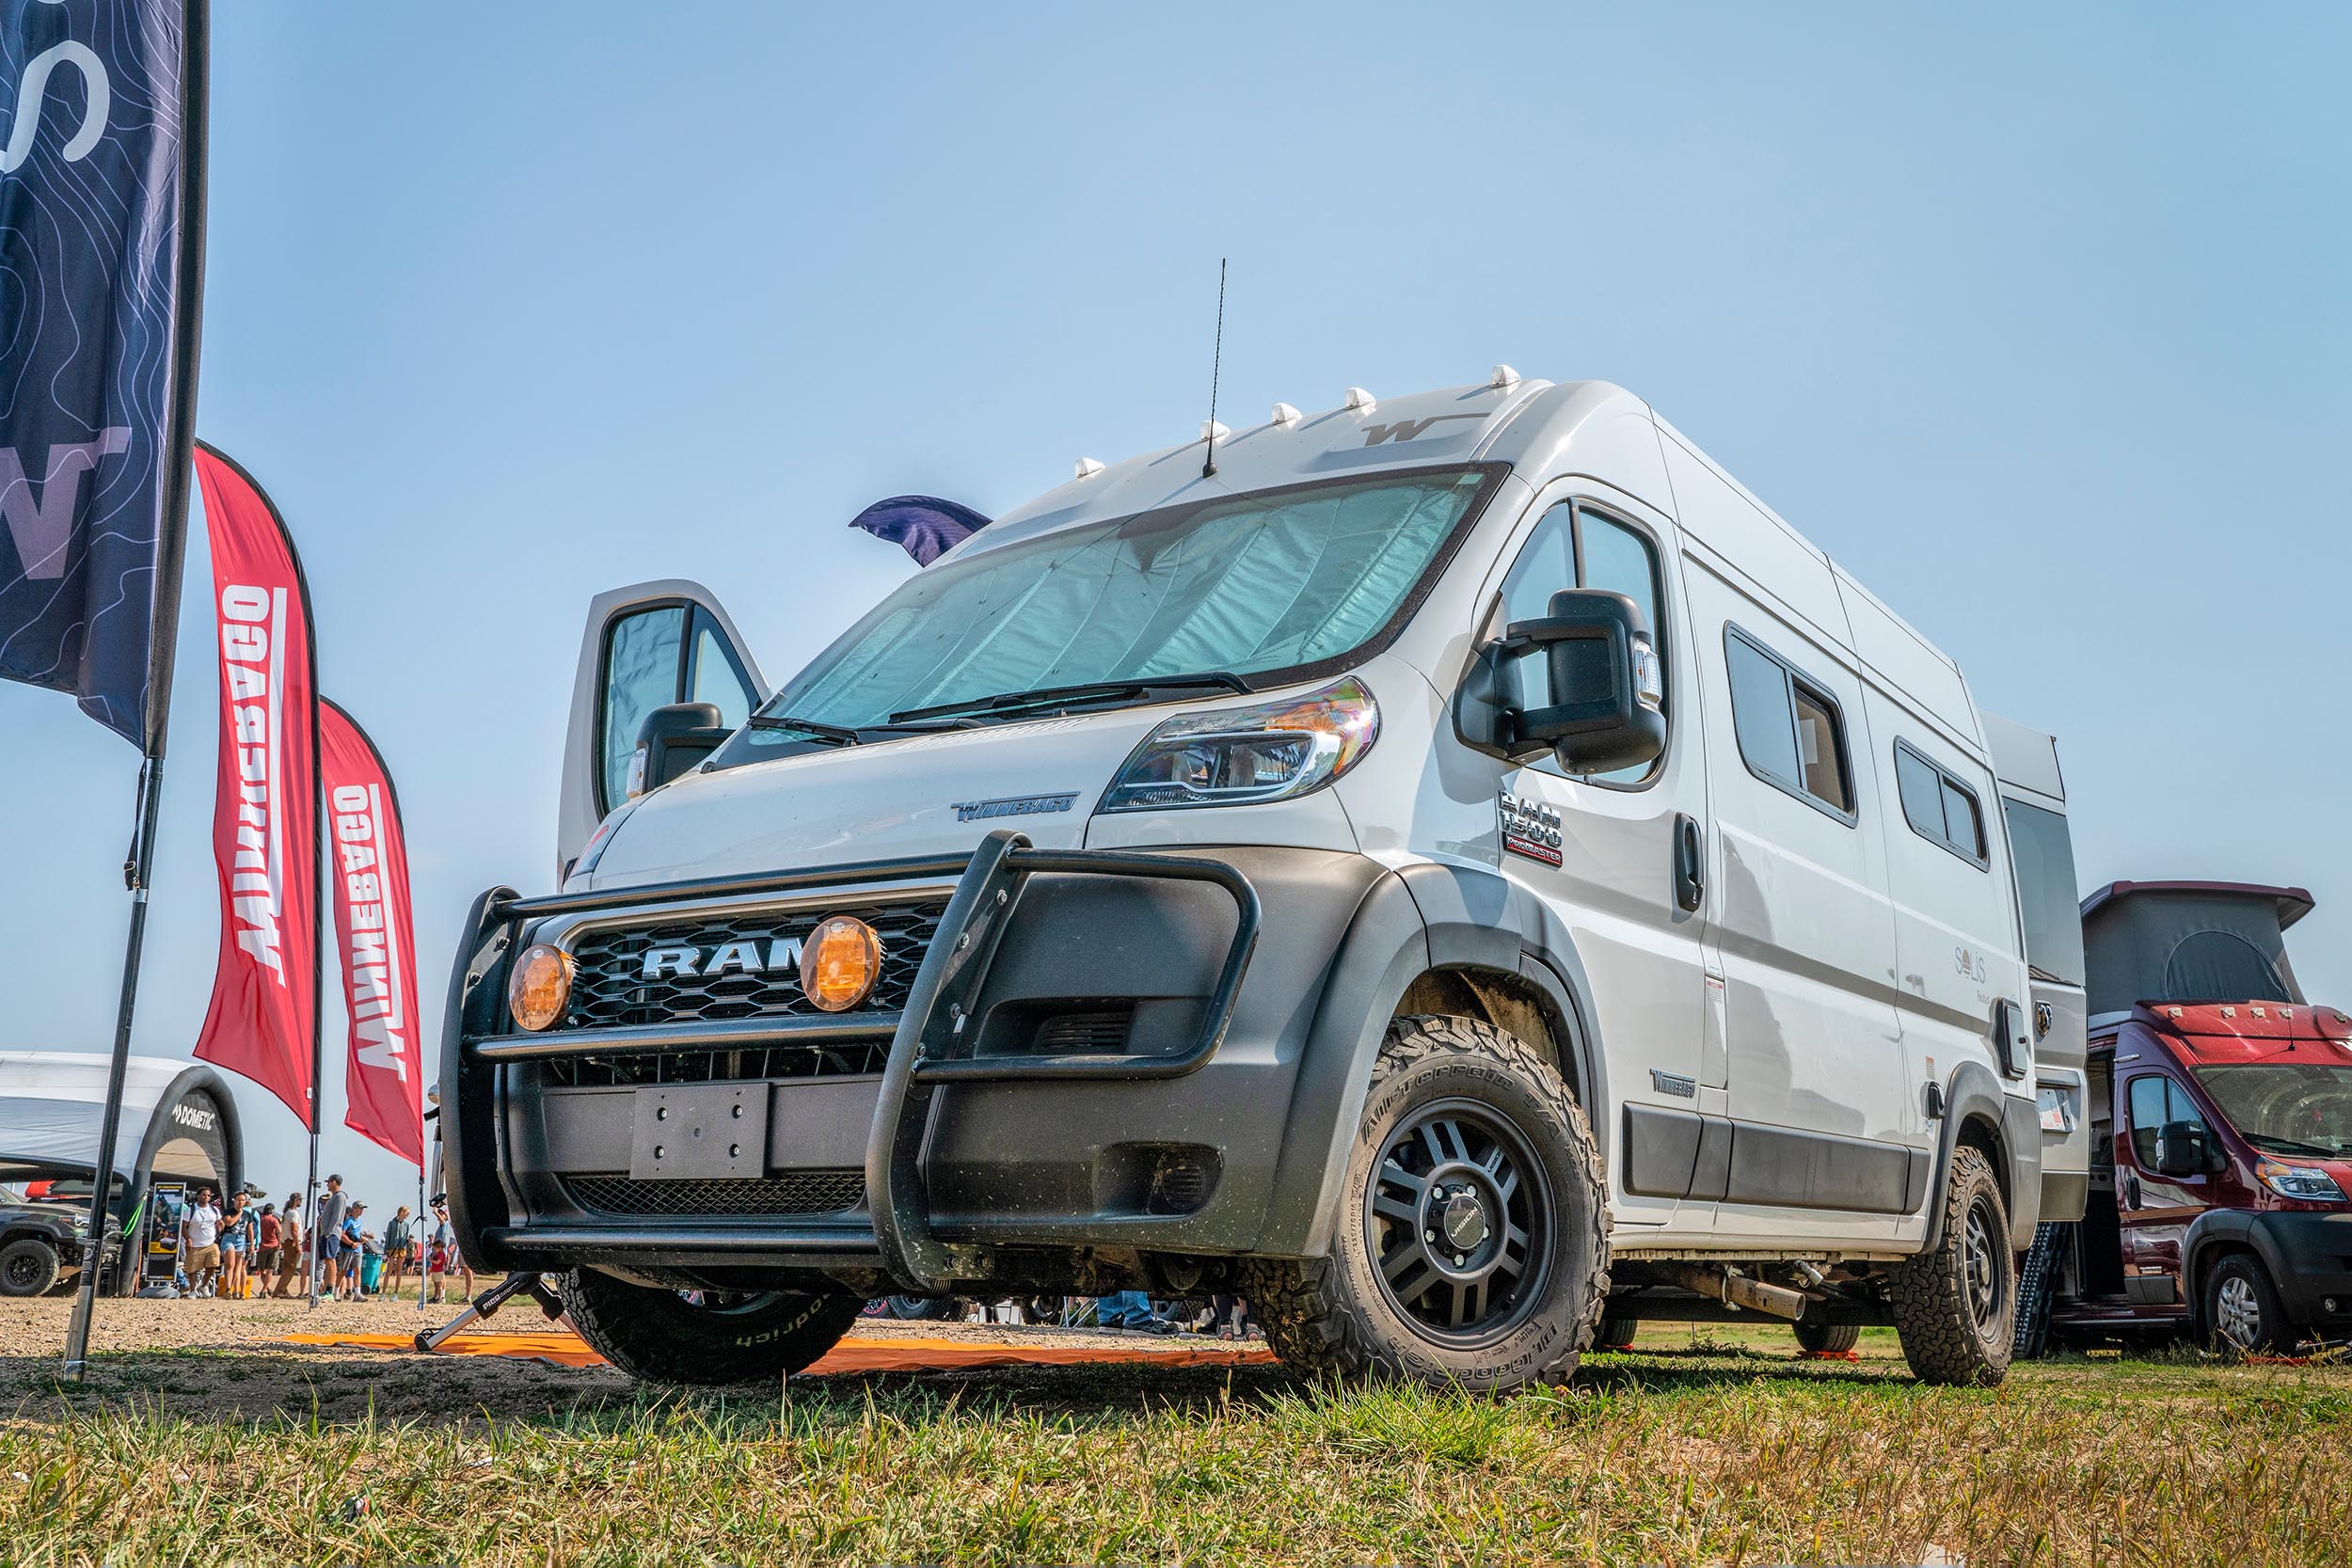 Outdoor Retailer Parent Company Acquires Overland Expo Series